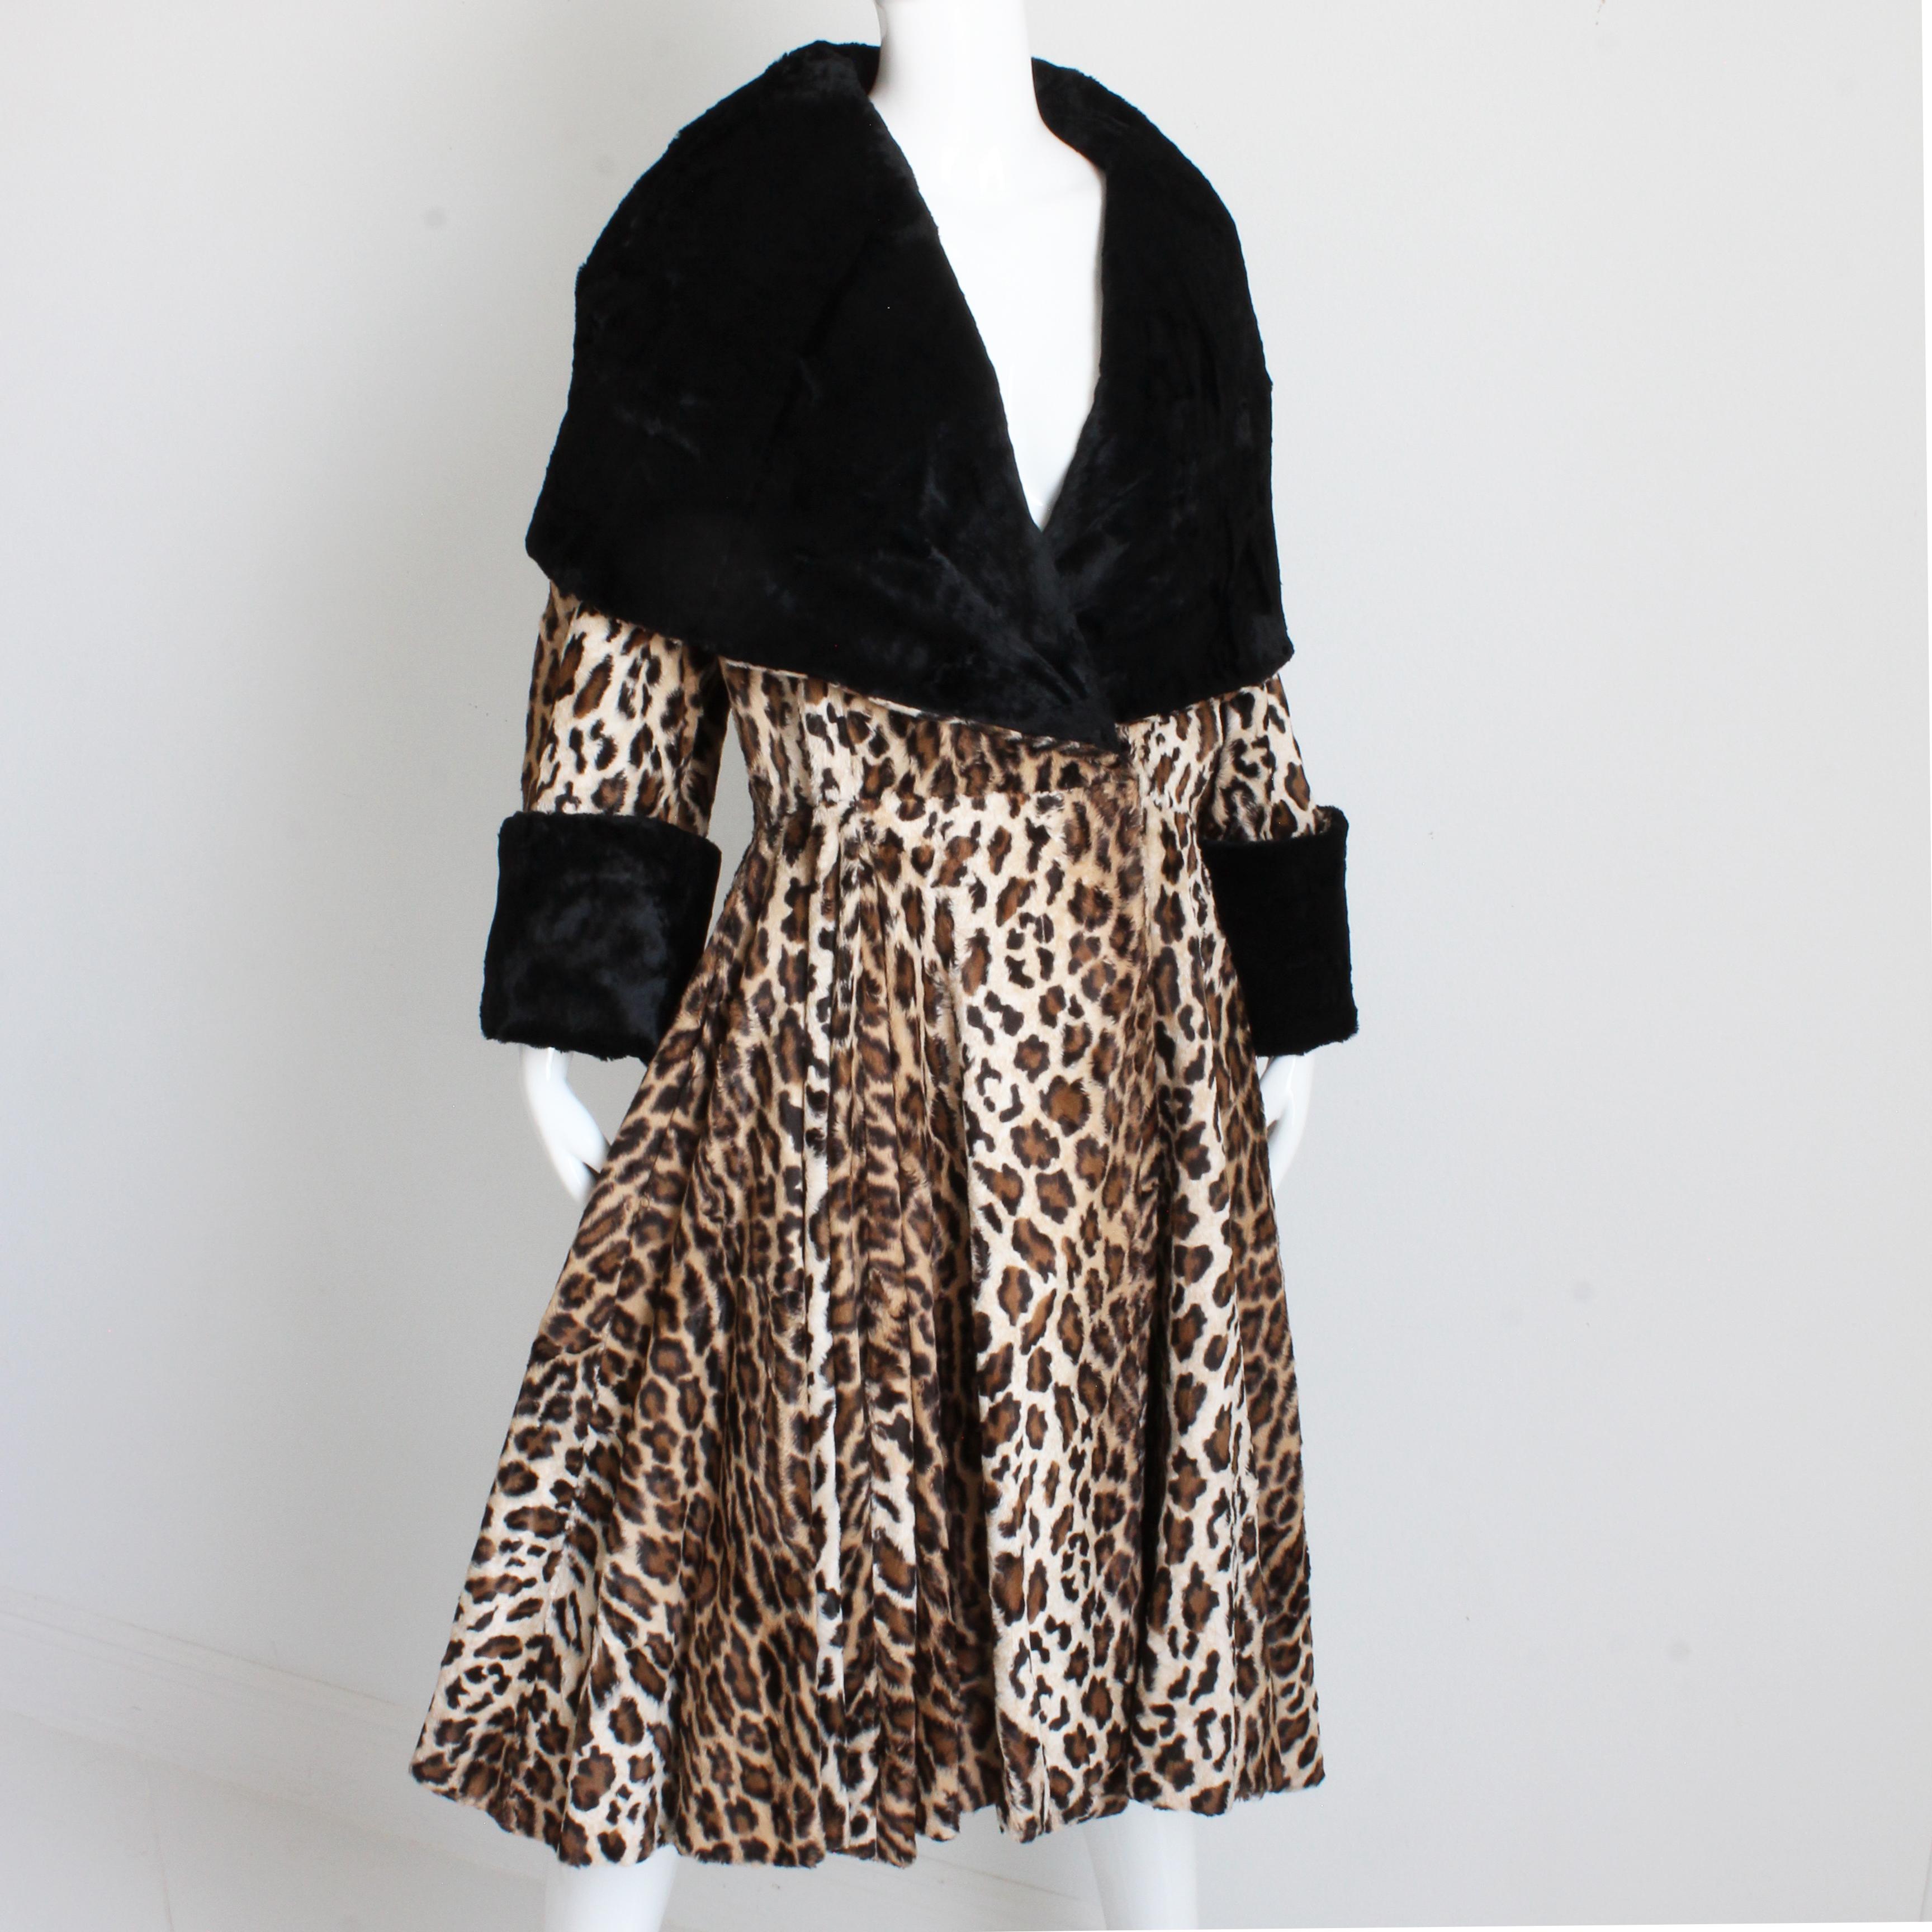 Authentic, preowned, vintage Norma Kamali OMO faux leopard fur coat with oversized shawl collar, likely made in the 80s.  Made from a supple faux leopard fur, it features black contrasting faux fur on the shawl collar lining and sleeve cuffs!  The